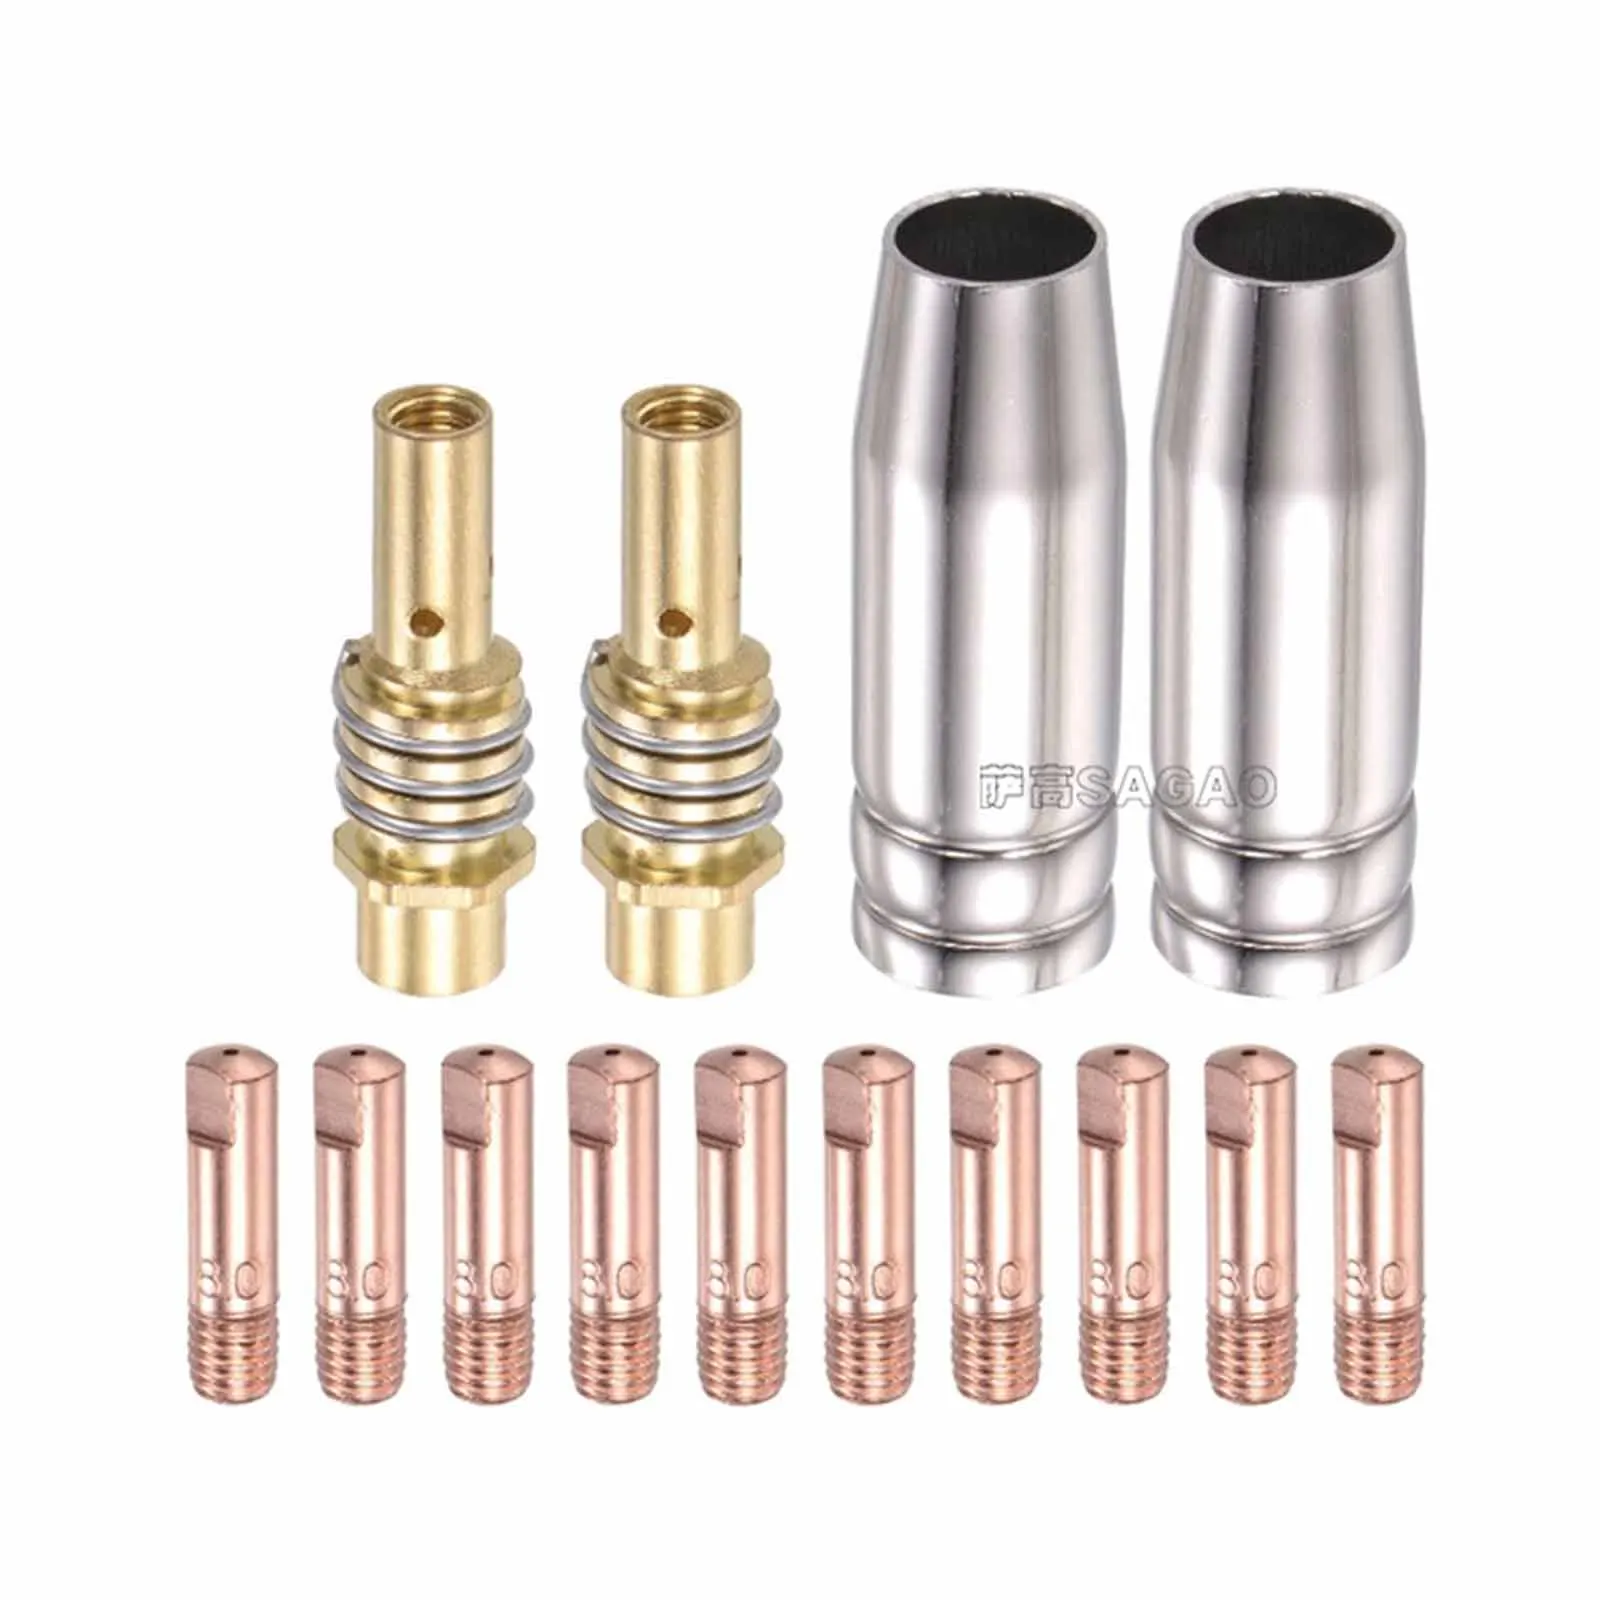 

14PC MIG/MAG Welding Torch Power Nozzle M6 0.8 Mm Gas Nozzles 53mm Length For MB14/15 ML 1500 G15 SB 15 Welding Tool Parts